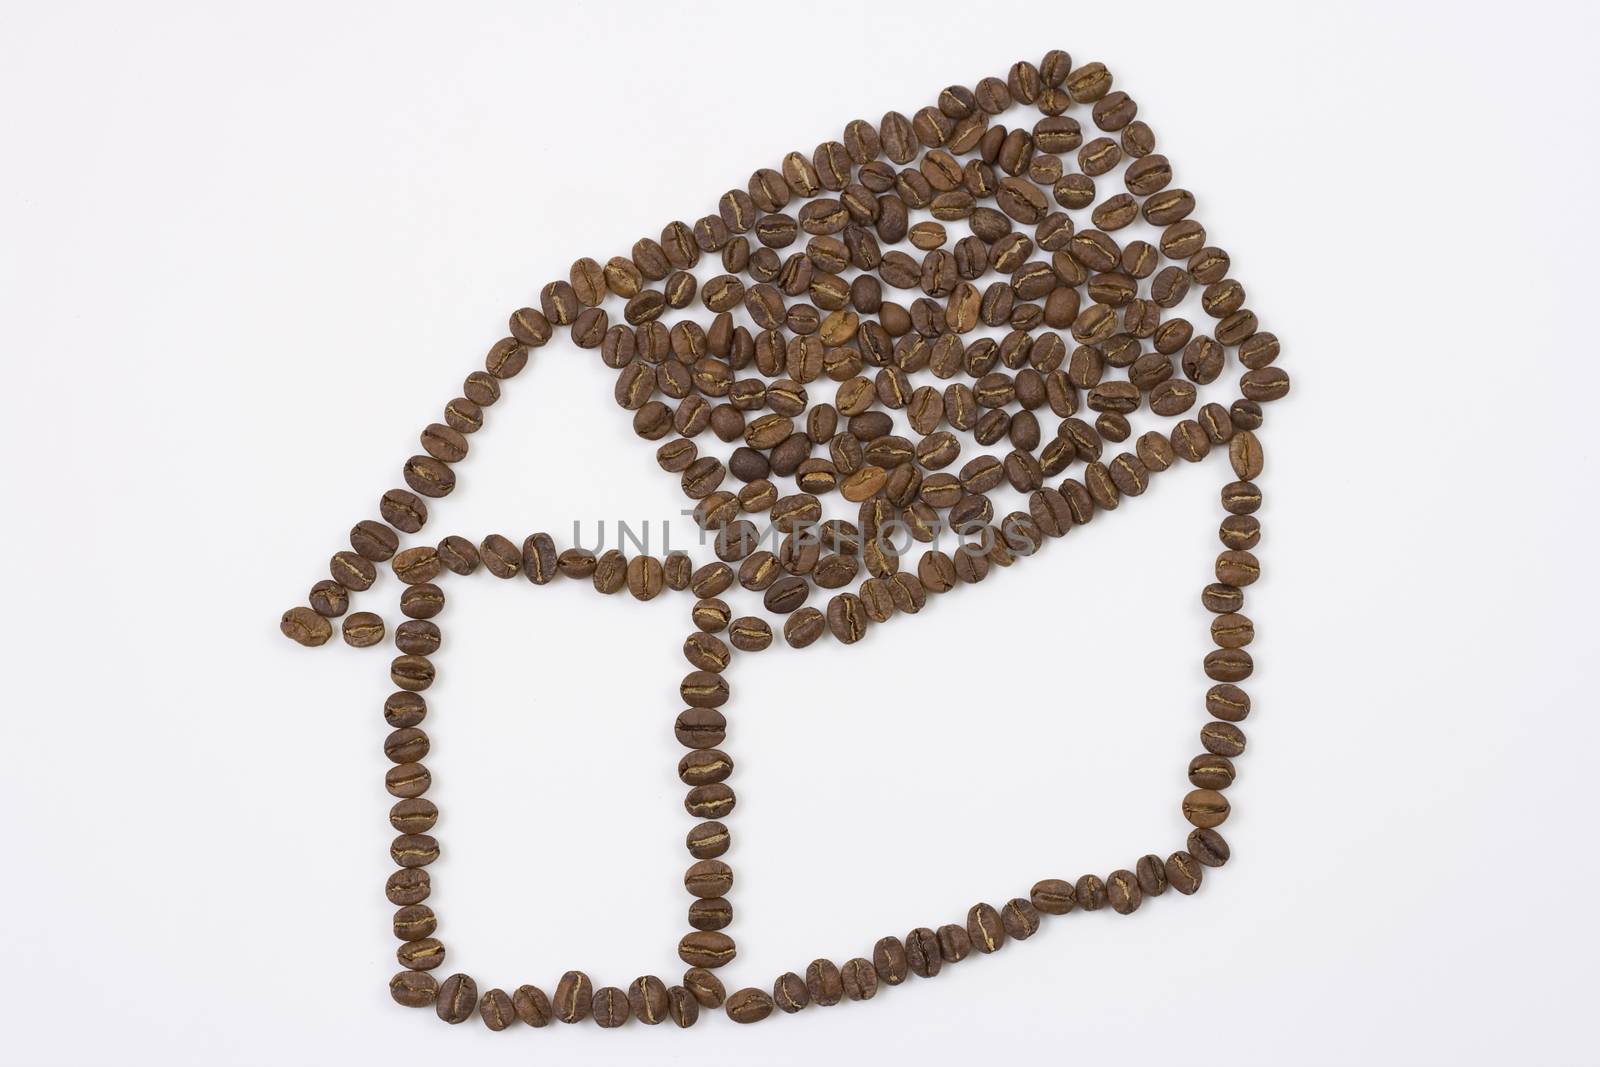 coffee house made from coffee beans on white background